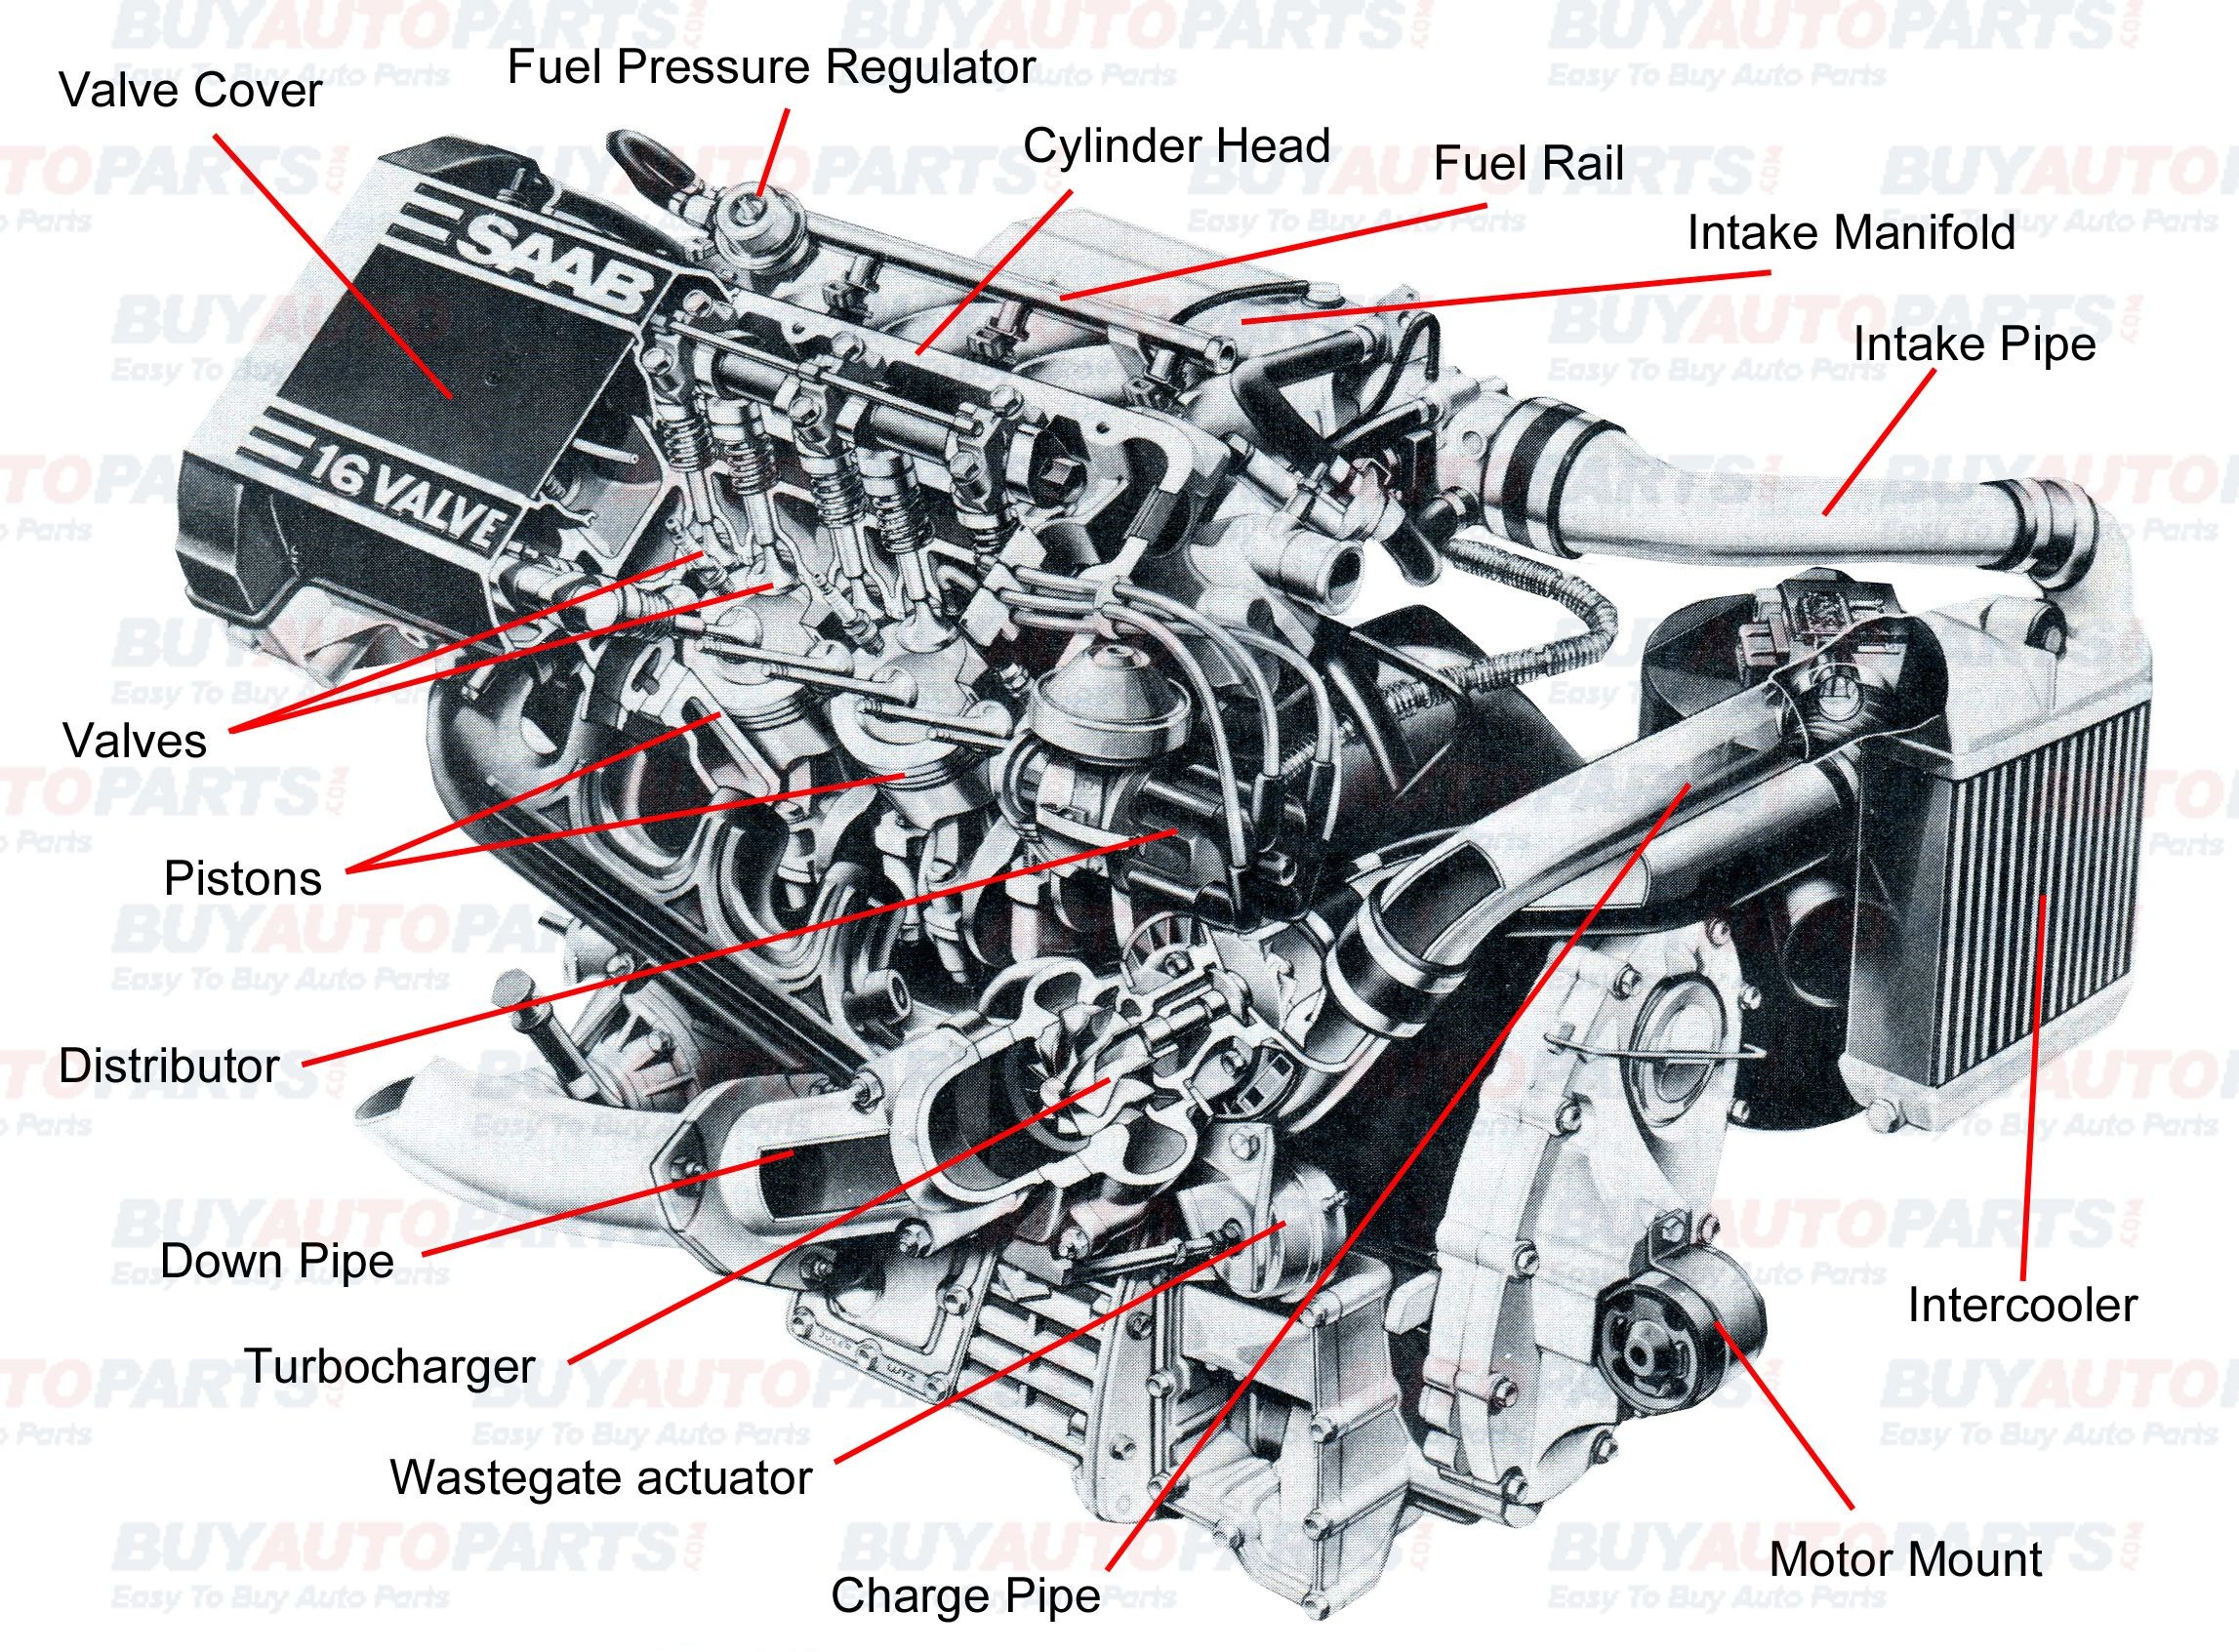 Automobile Engine Diagram Pin by Jimmiejanet Testellamwfz On What Does An Engine with Turbo Of Automobile Engine Diagram